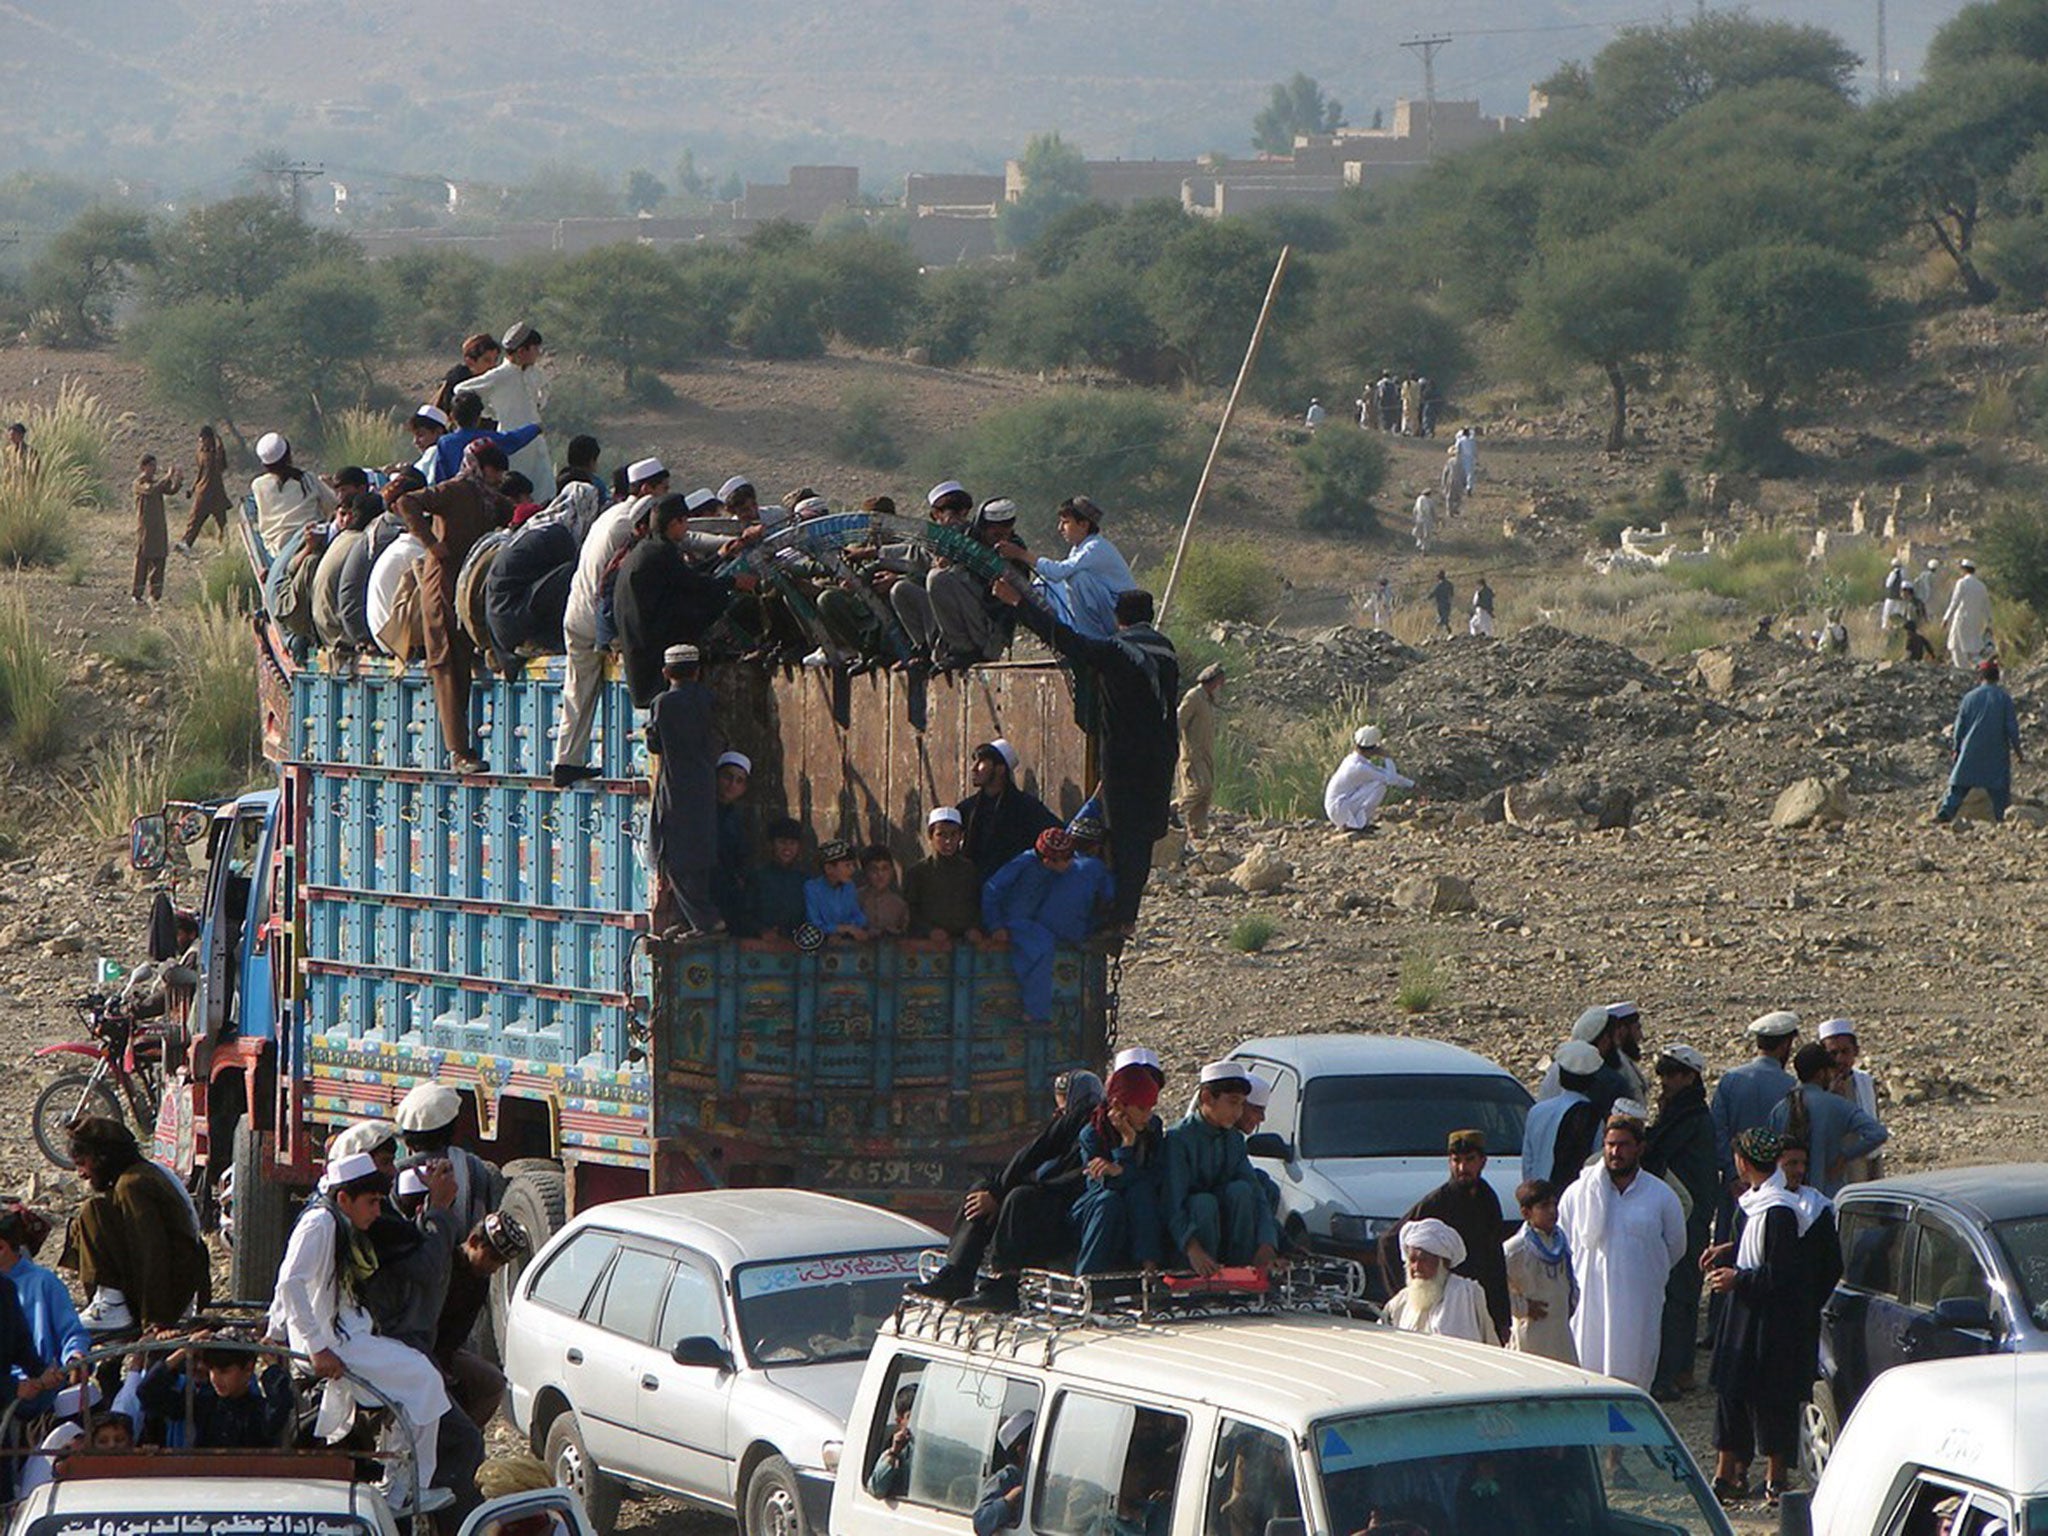 Fleeing internally displaced Pakistanis, stuck in a curfew imposed due to the Afghan election, are pictured near the mountainous North Waziristan district Miranshah on 14 June 2014